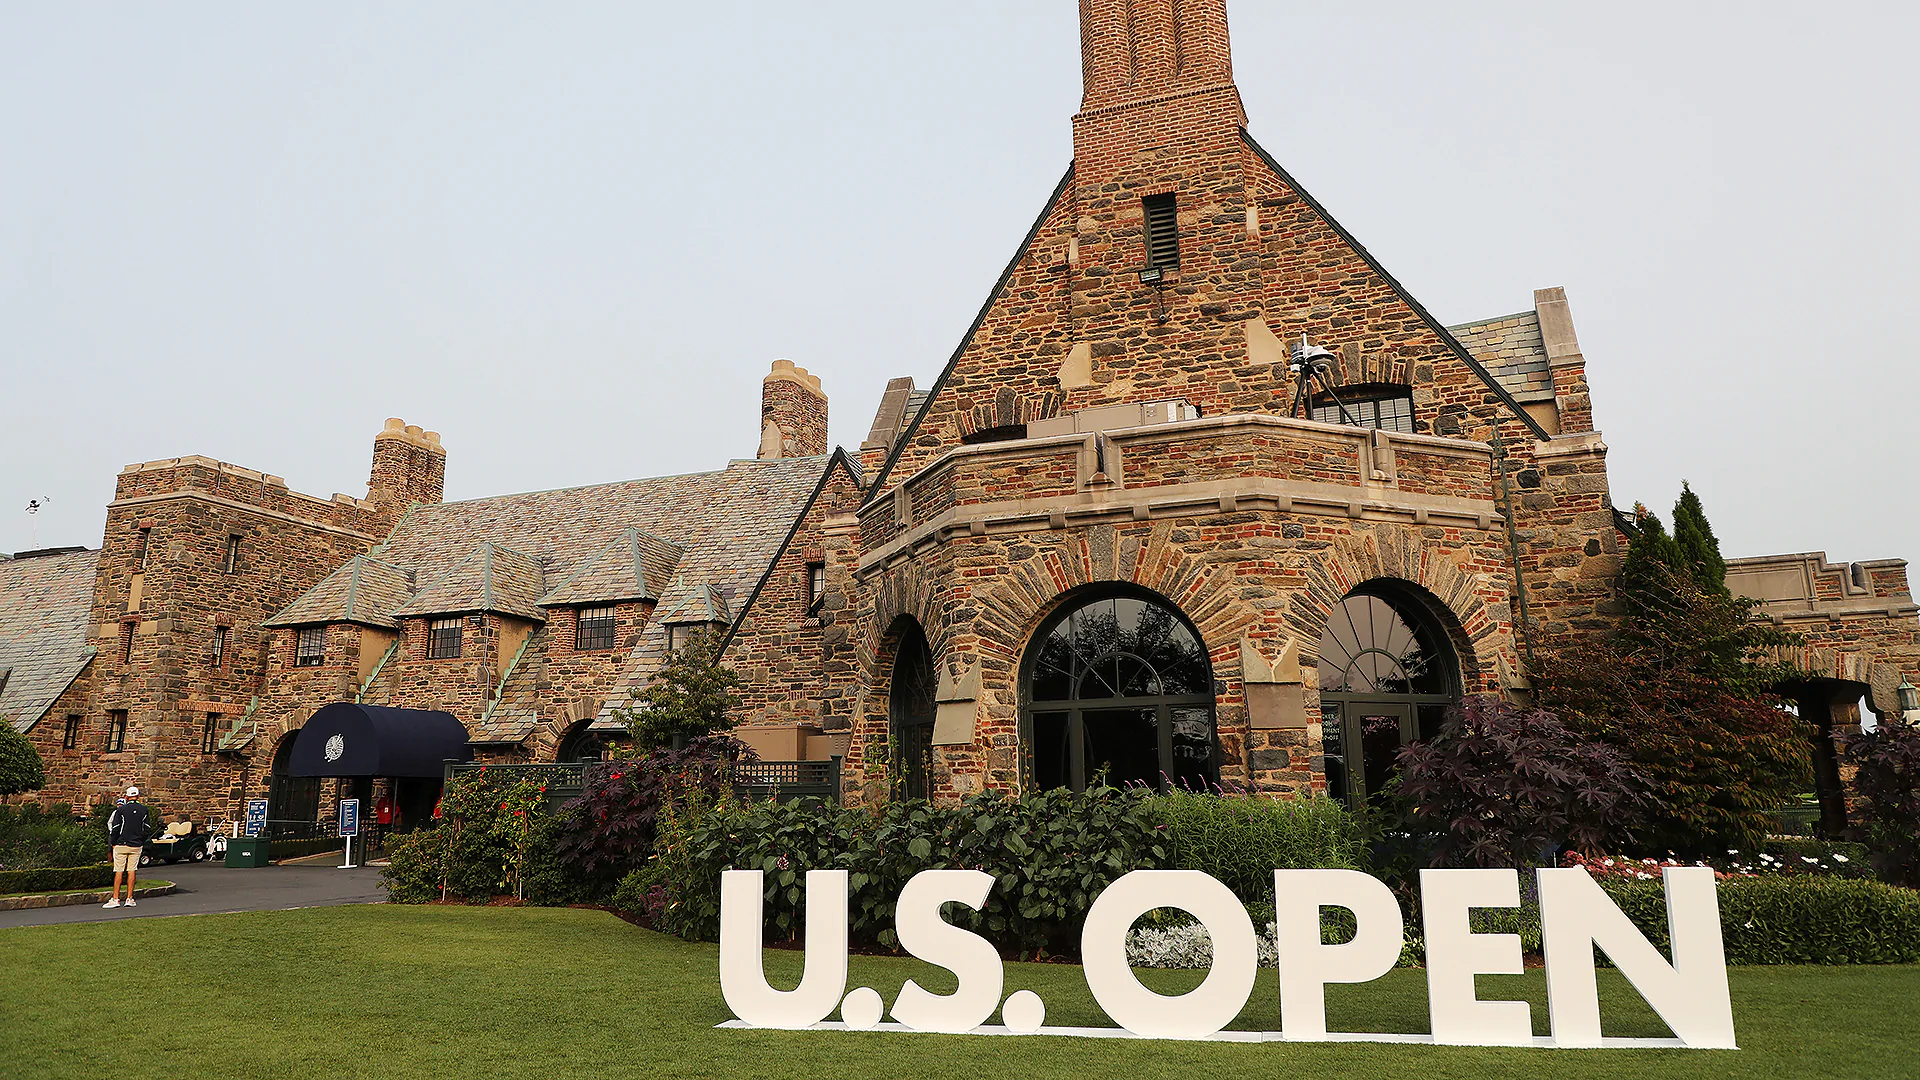 Round 1 and Round 2 tee times for the U.S. Open at Winged Foot 4